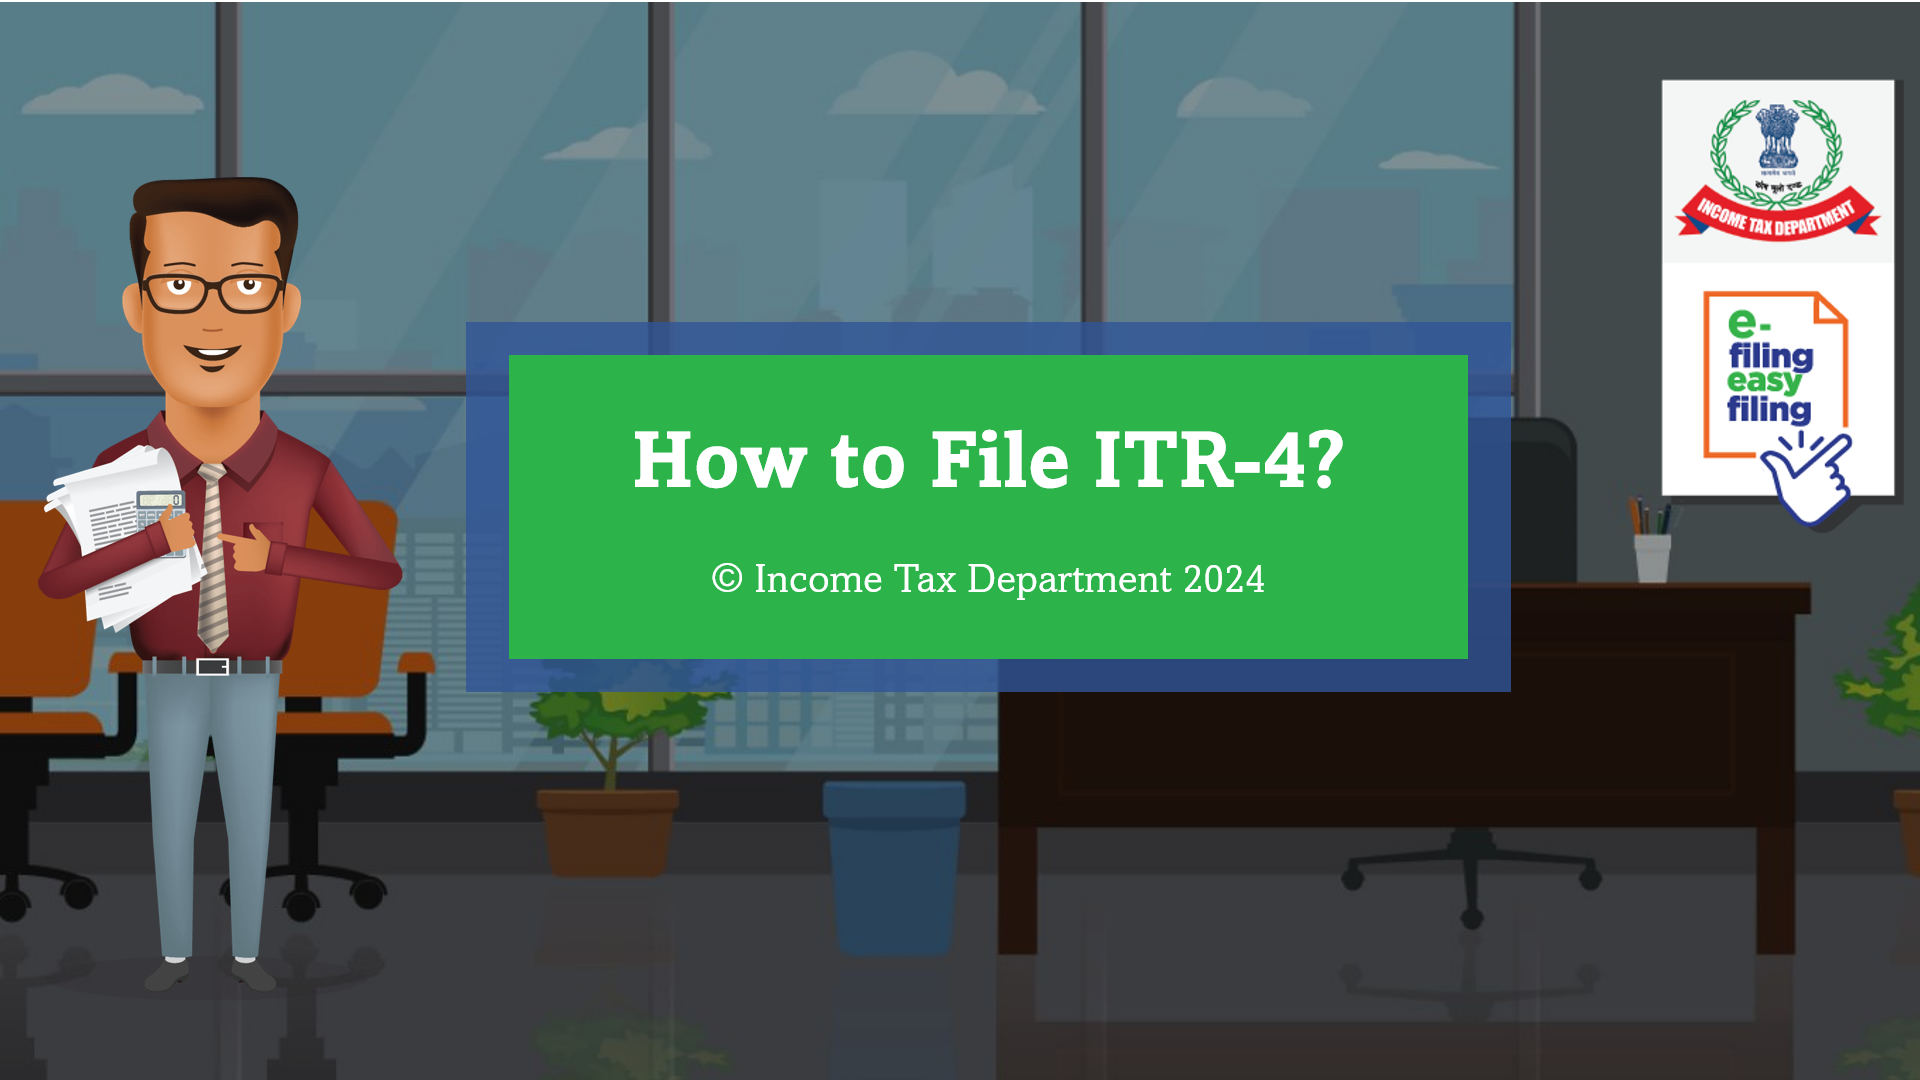 How to file ITR 4?